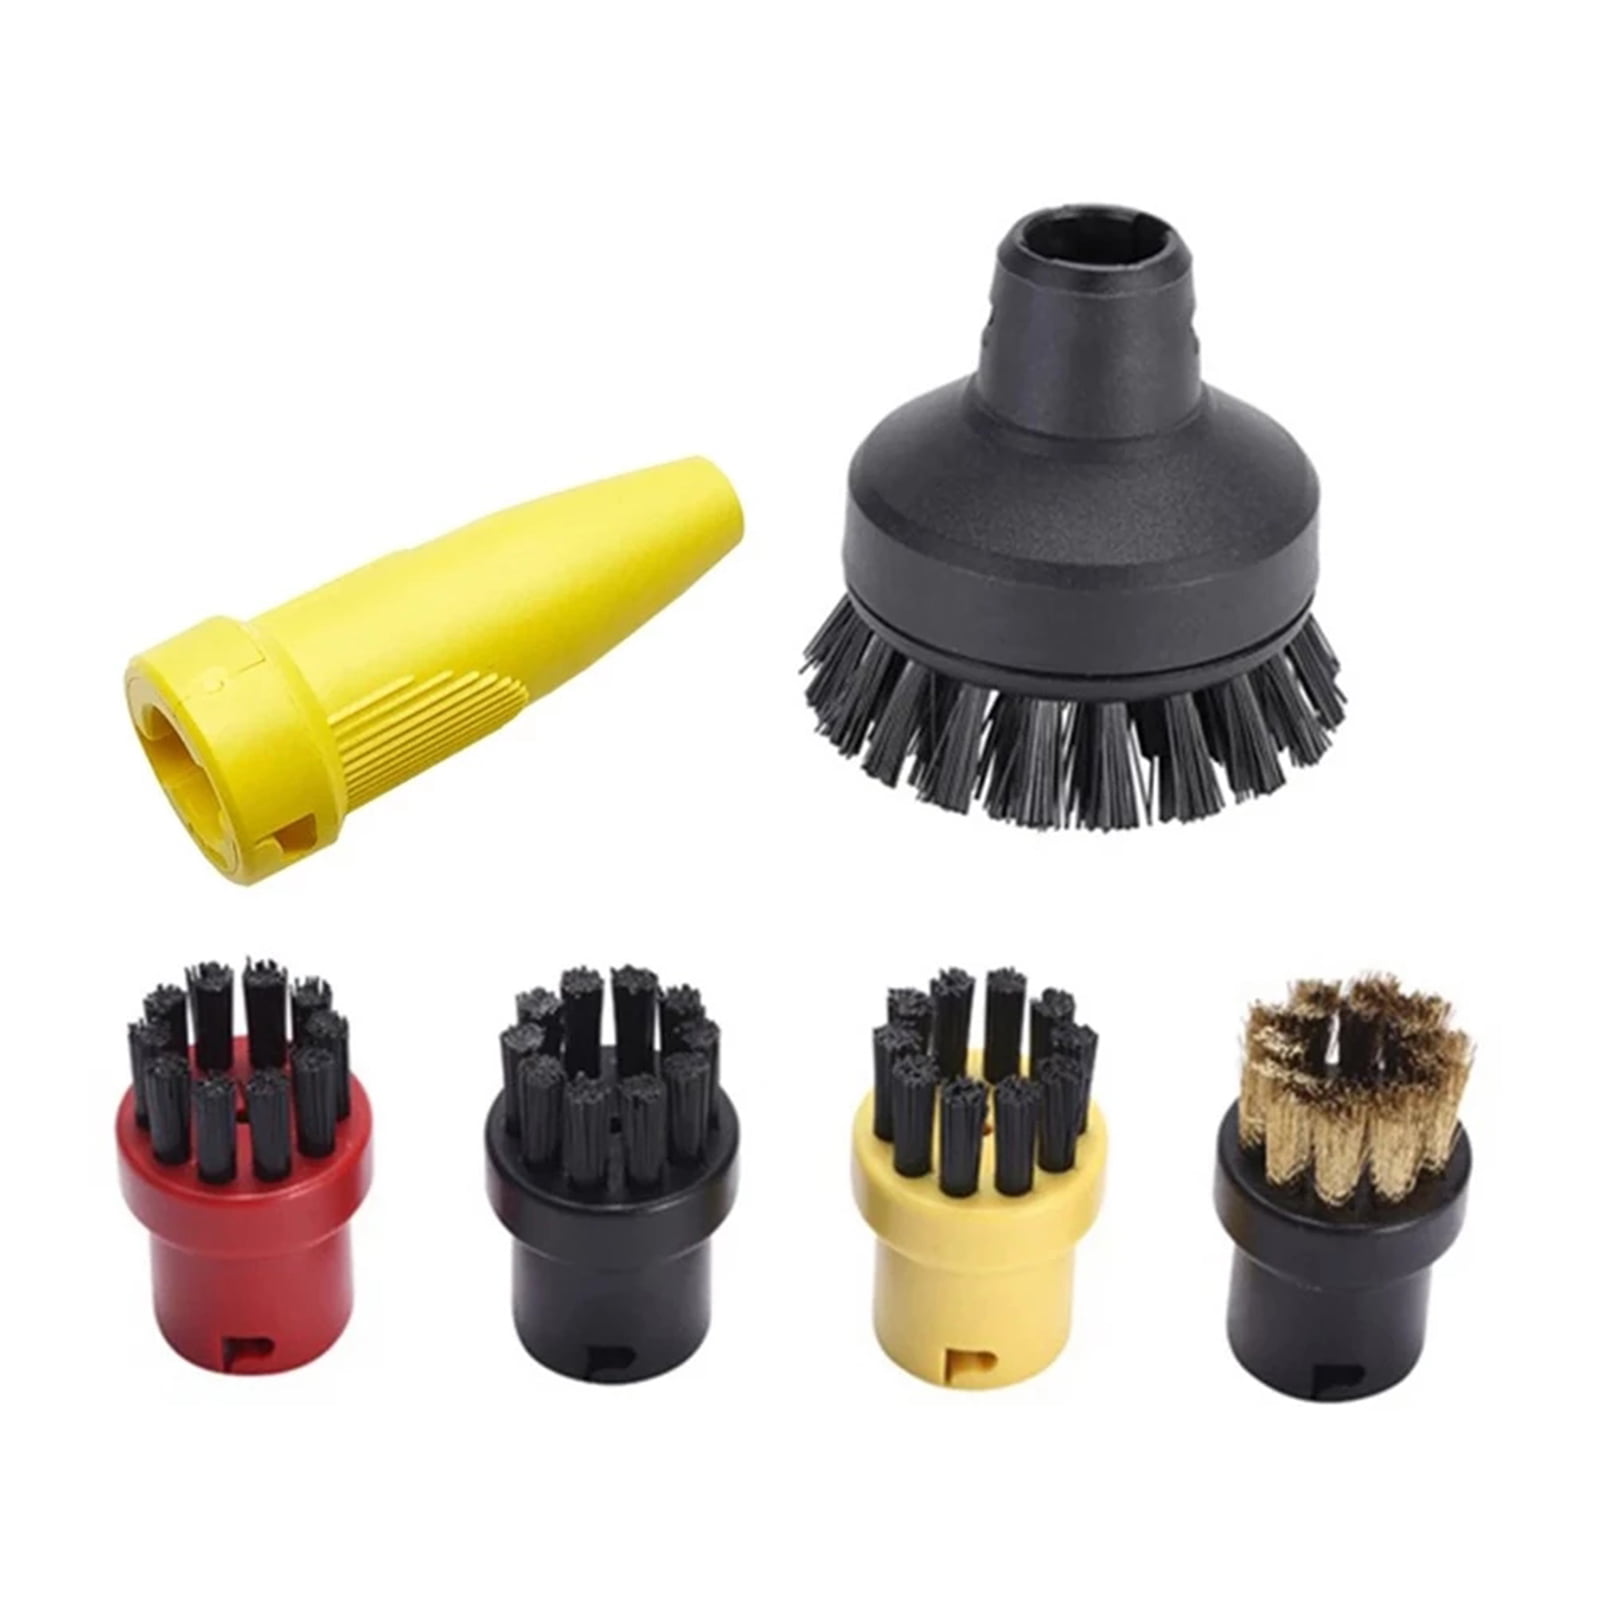 4 x Round Nylon Brushes Nozzles For Karcher Steam Mop Cleaners Brush 